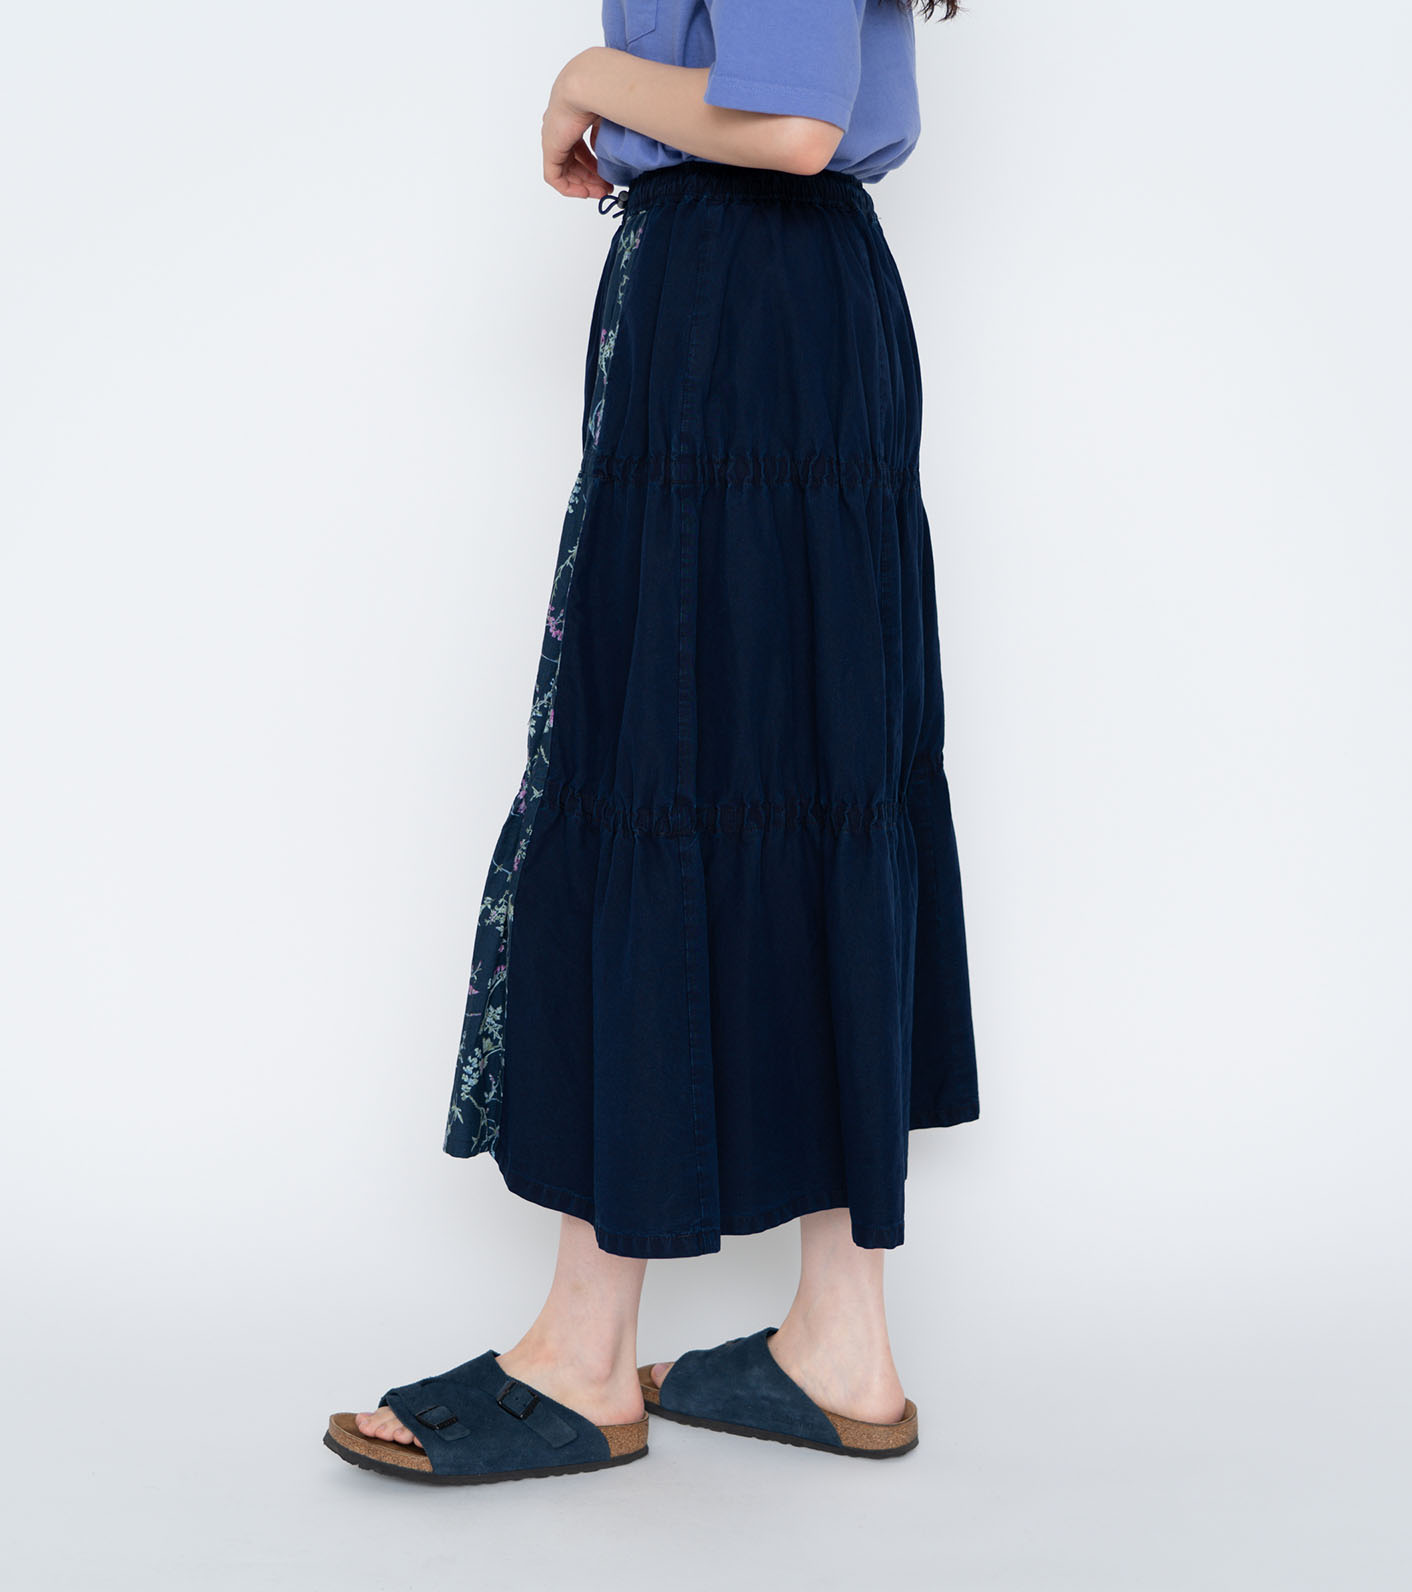 nanamica / Field Tiered Skirt